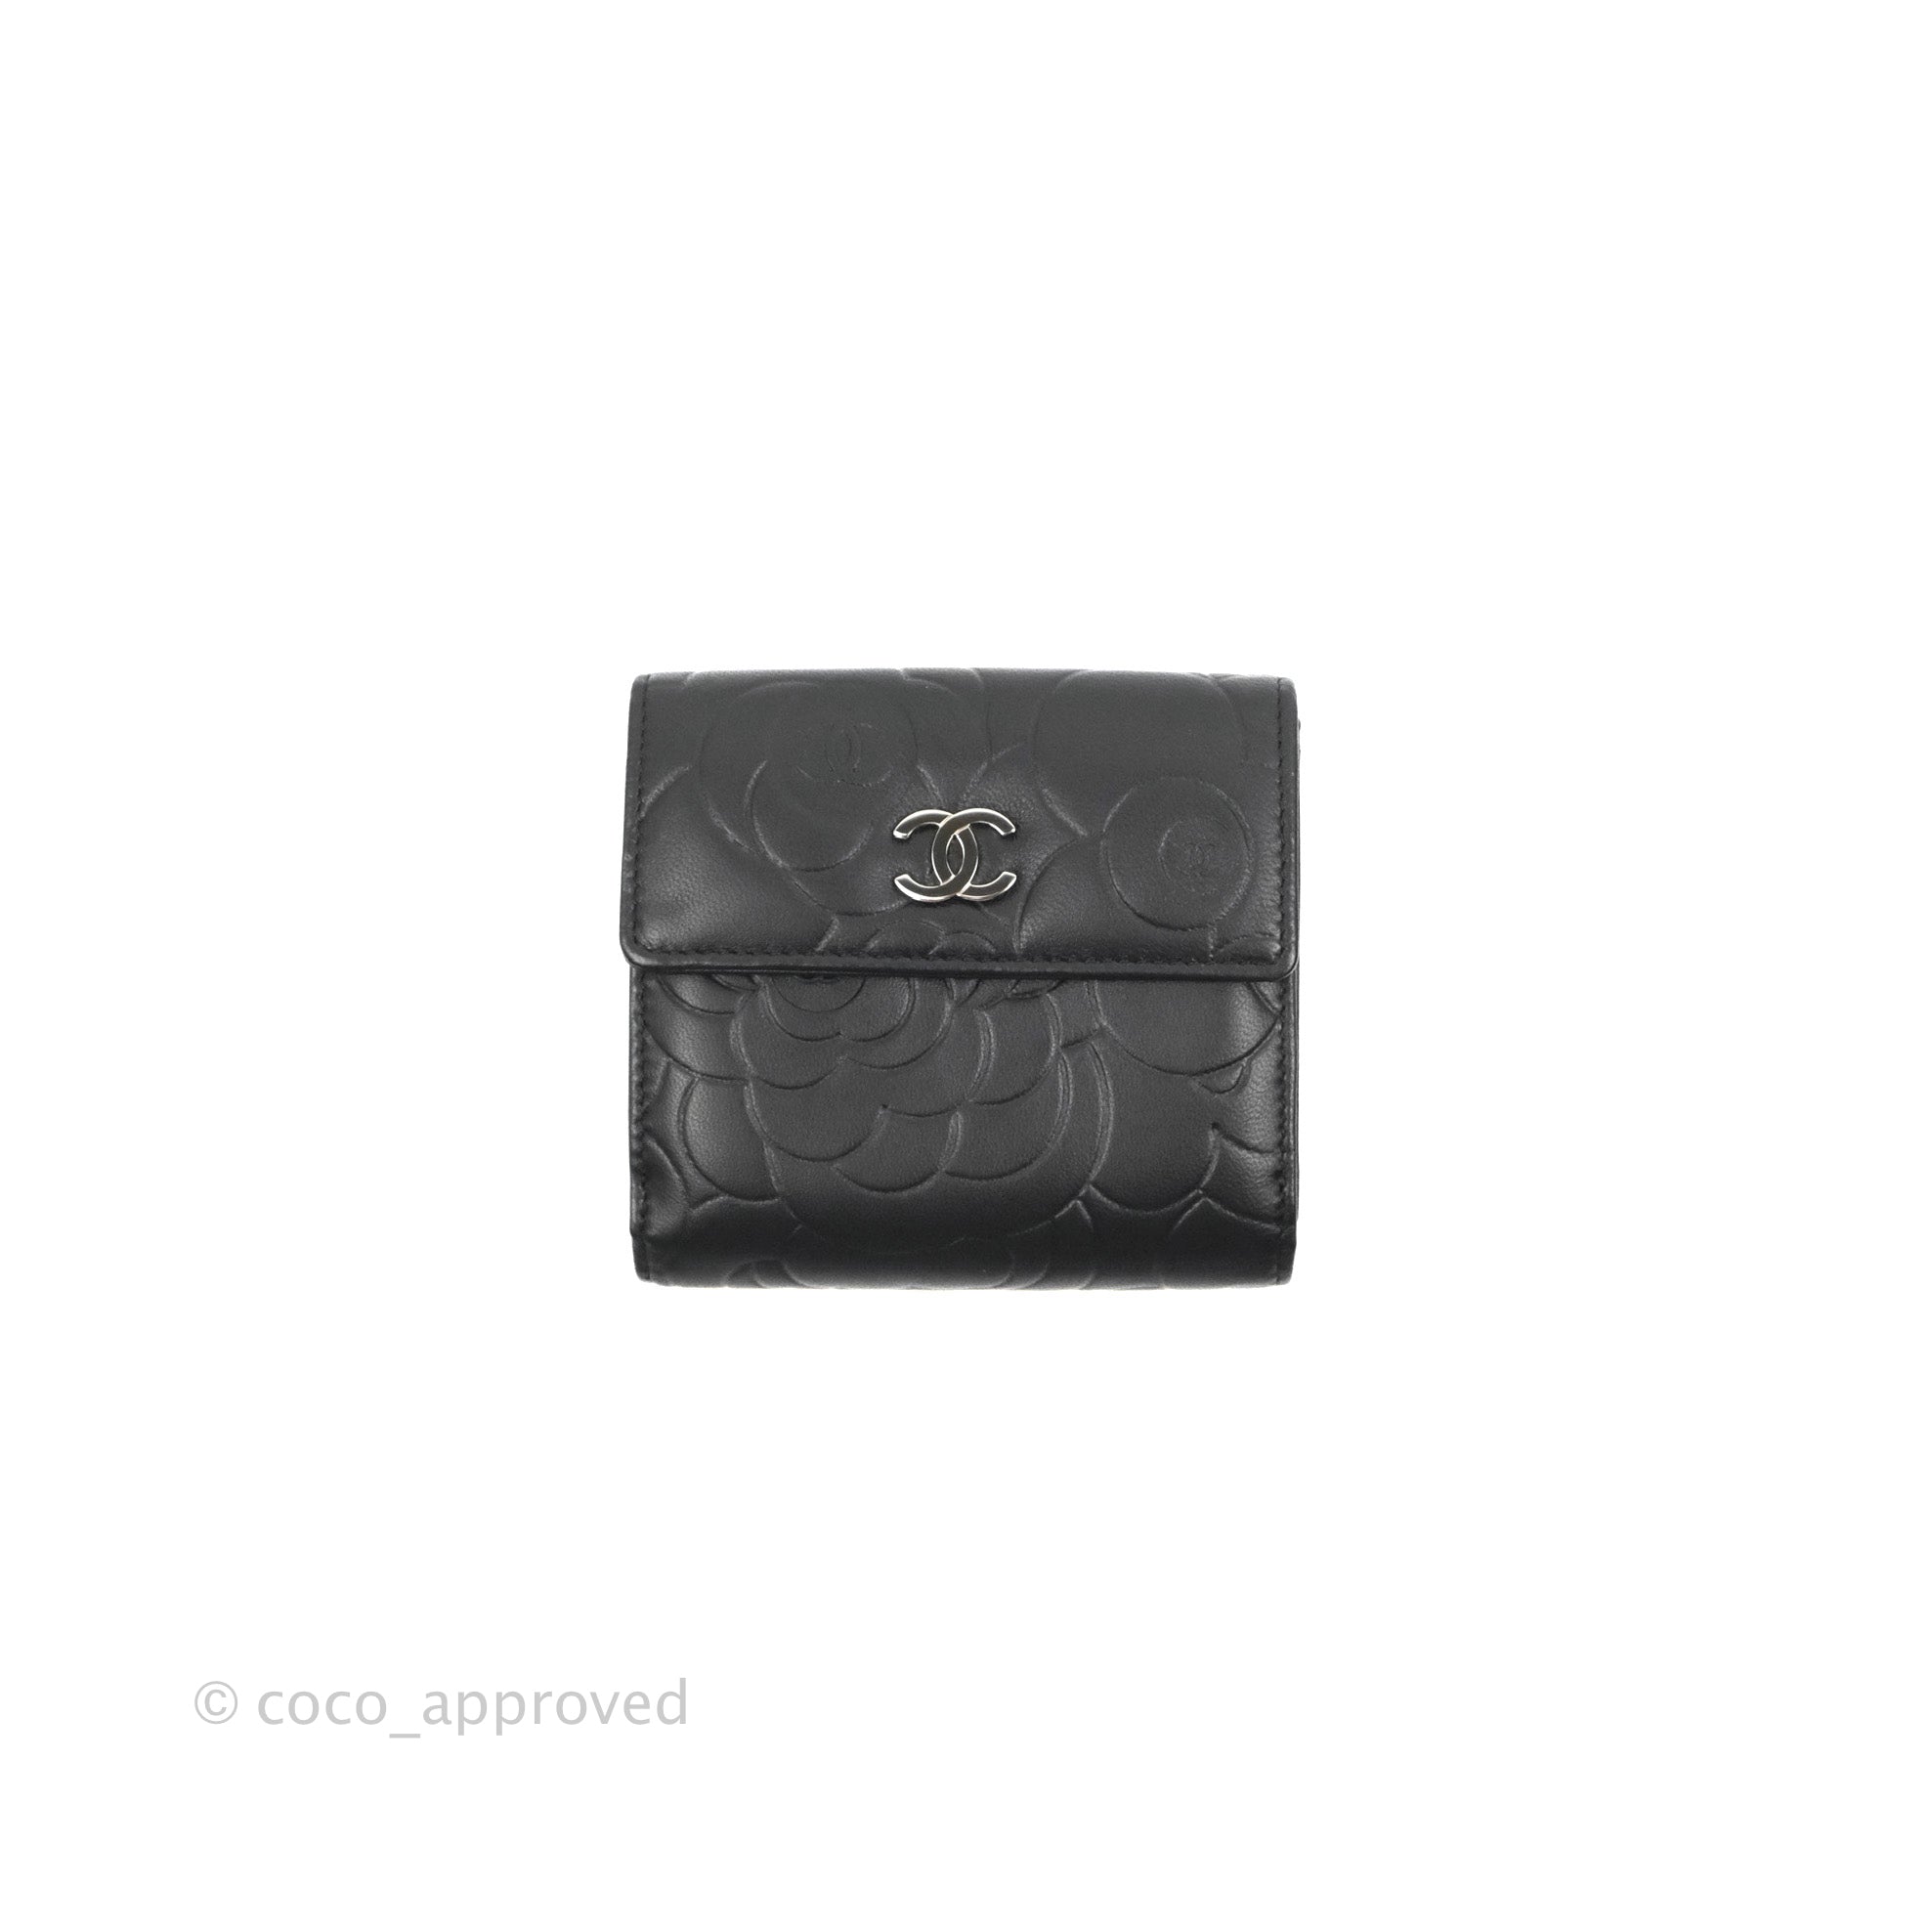 Chanel Black Leather Camellia Flap Wallet Chanel